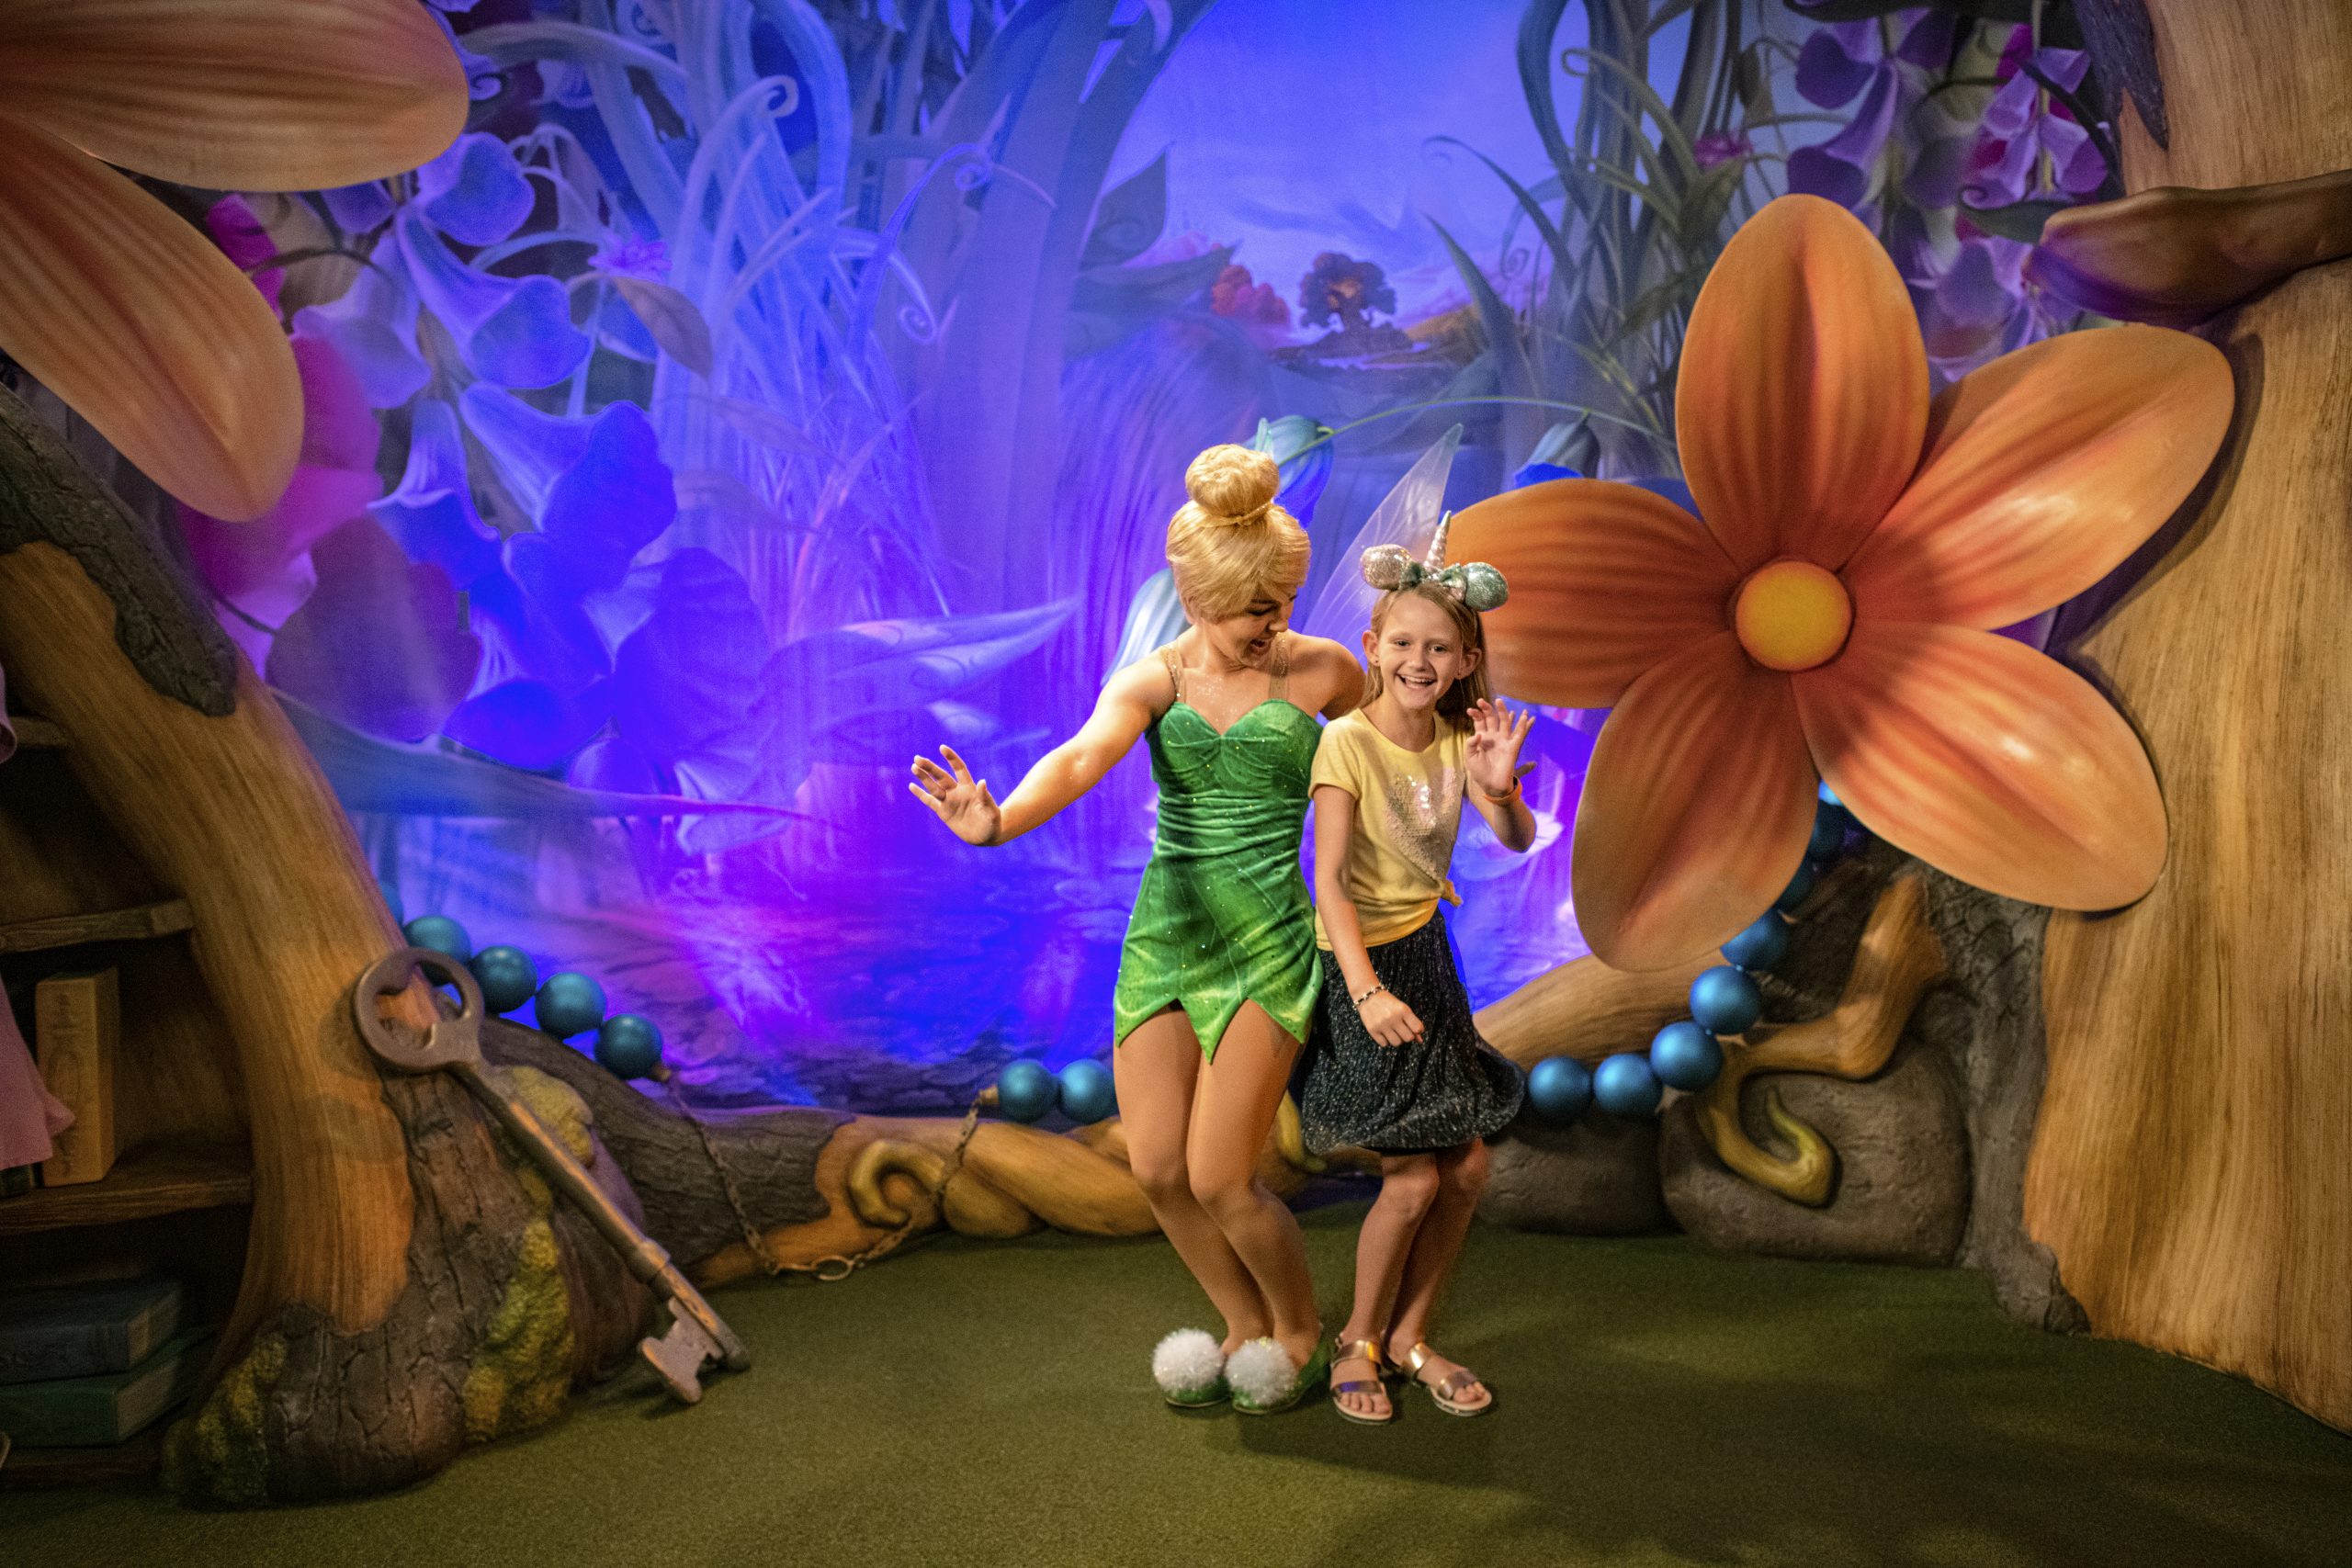 Tinkerbell and a young girl